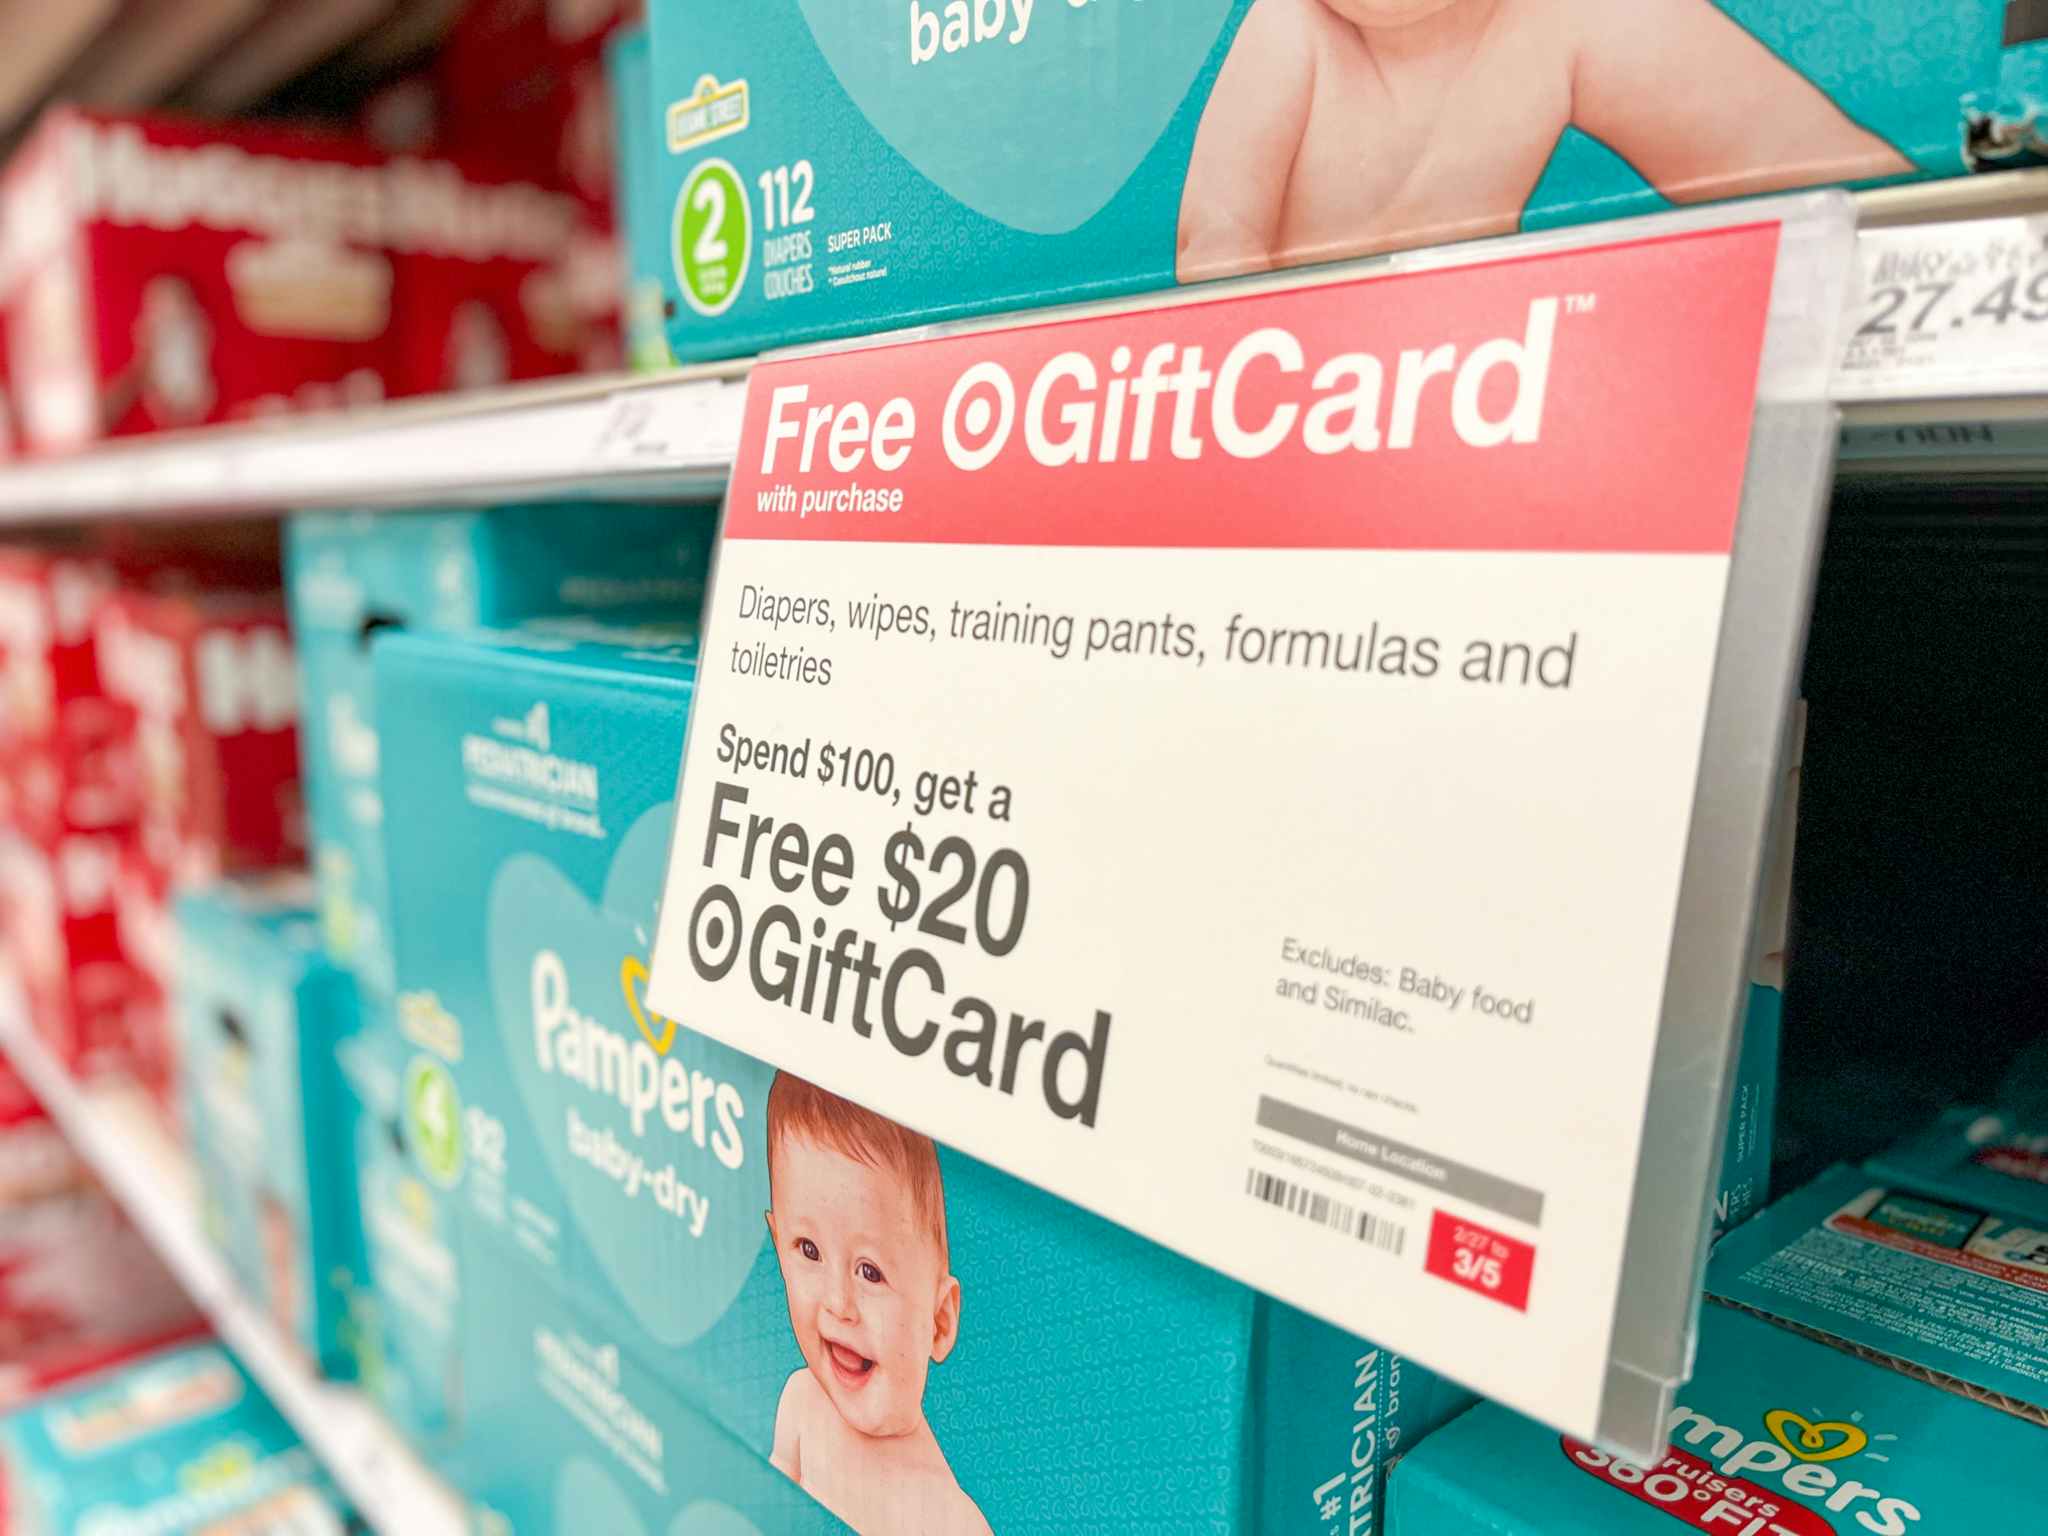 A shelf filled with pampers baby diapers with a sign that says Free Target Gift Card with $100 purchases of diapers, wipes, training pant...